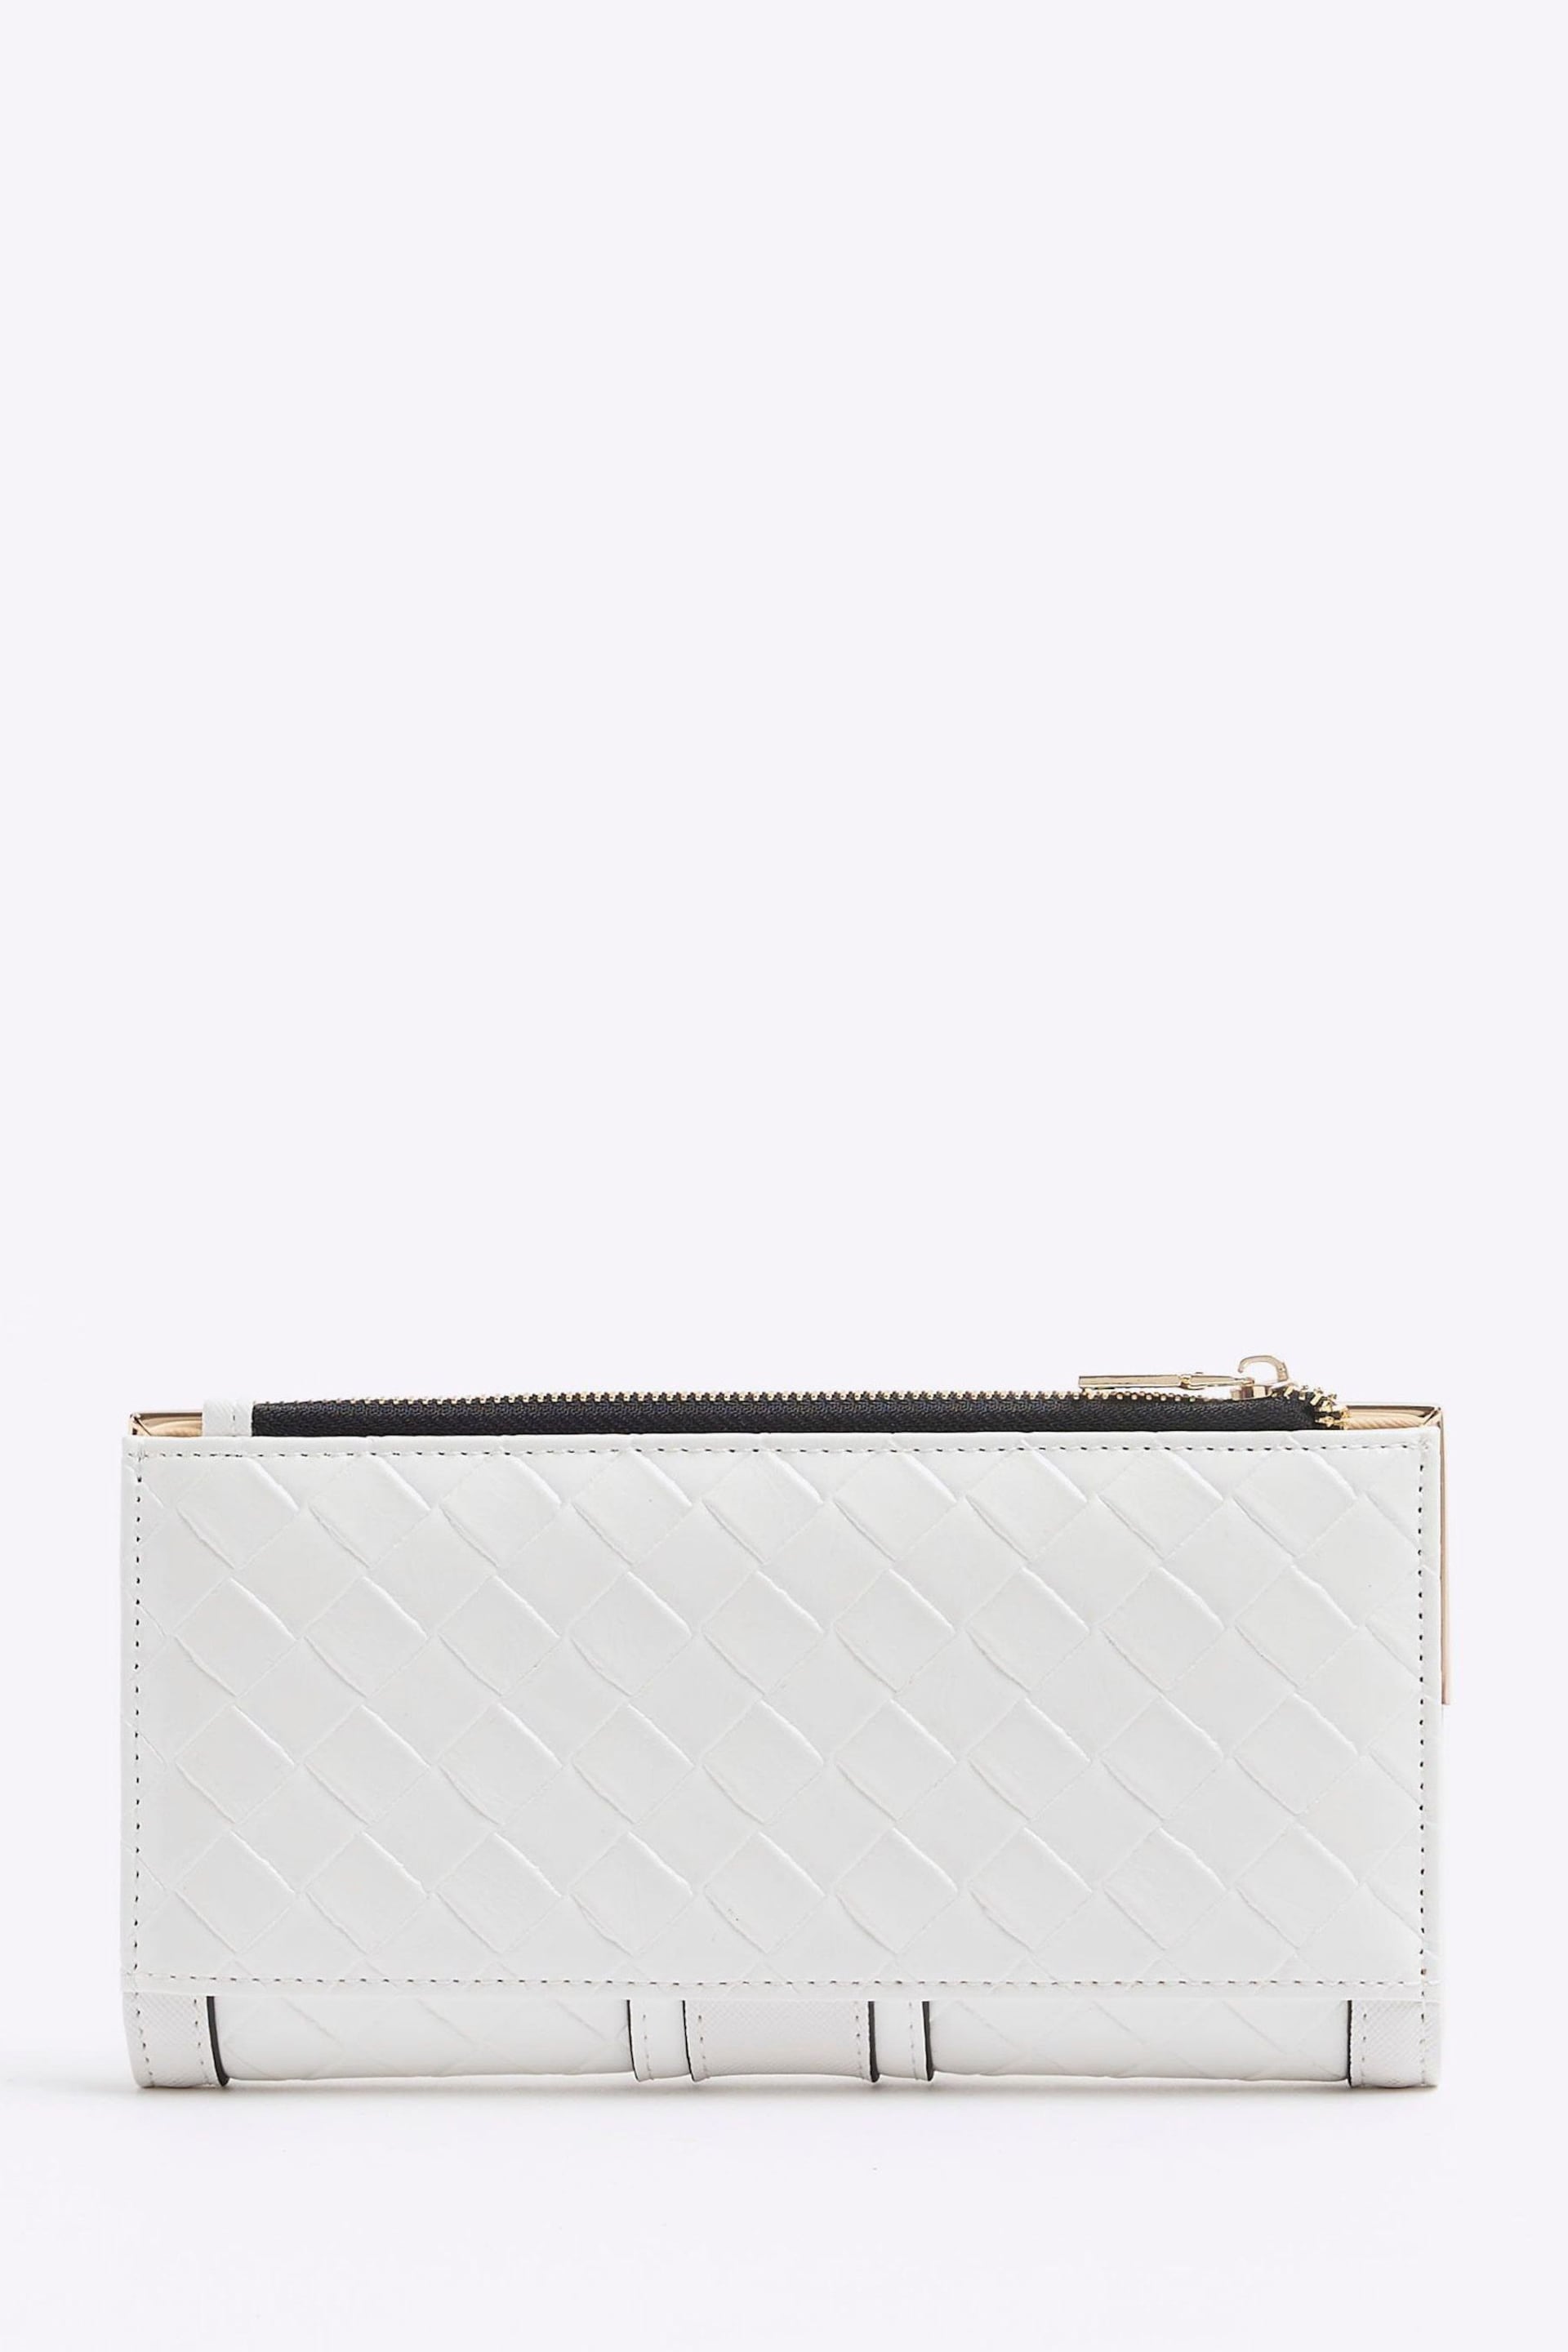 River Island White Embossed Weave Purse - Image 3 of 5